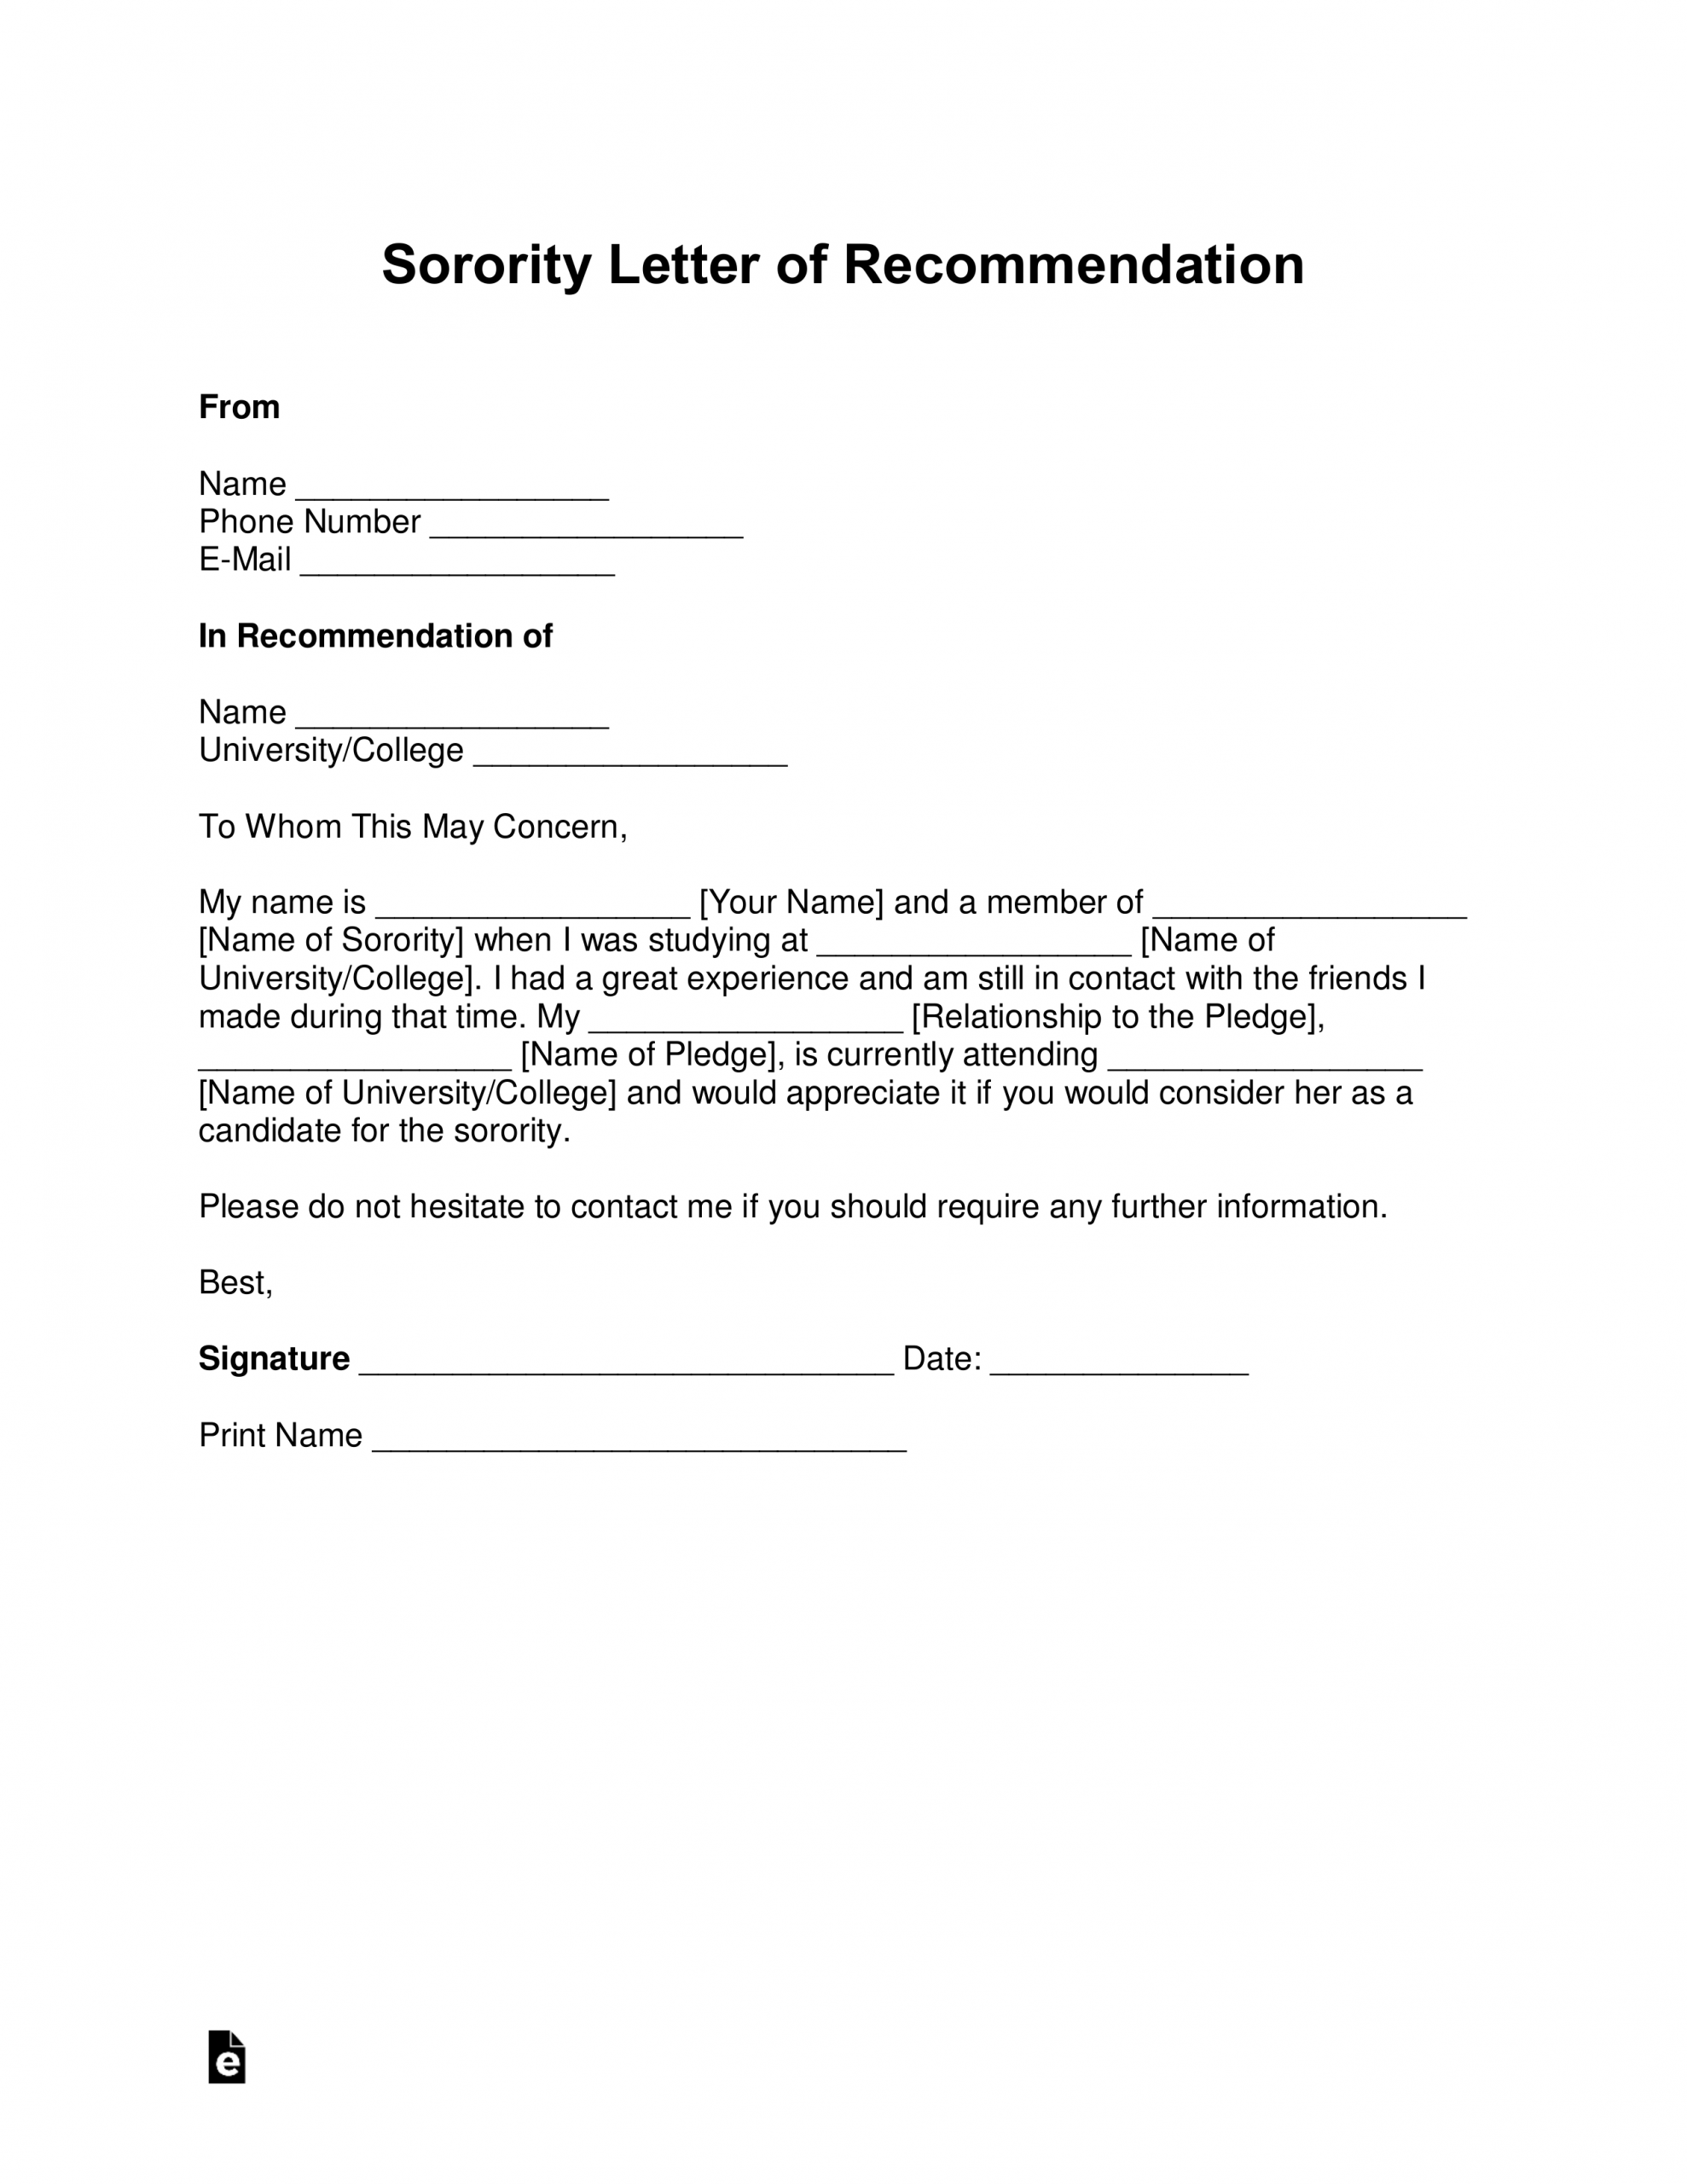 Free Sorority Recommendation Letter Template With Samples intended for dimensions 2550 X 3301